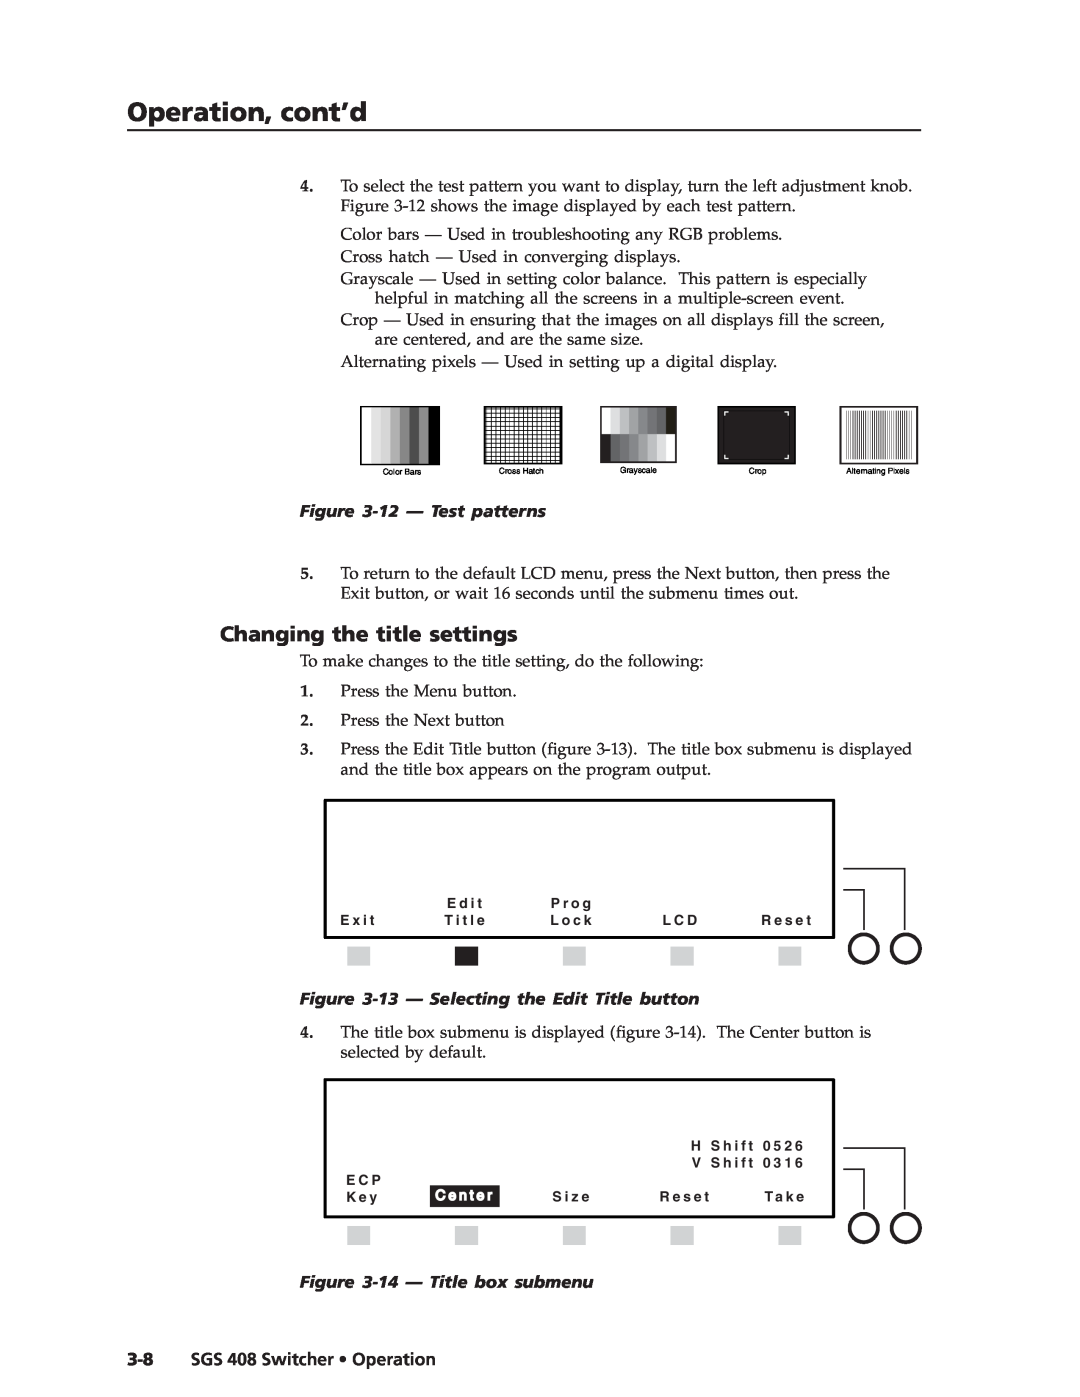 Extron electronic SGS 408 manual Changing the title settings, 12 - Test patterns, 13 - Selecting the Edit Title button 